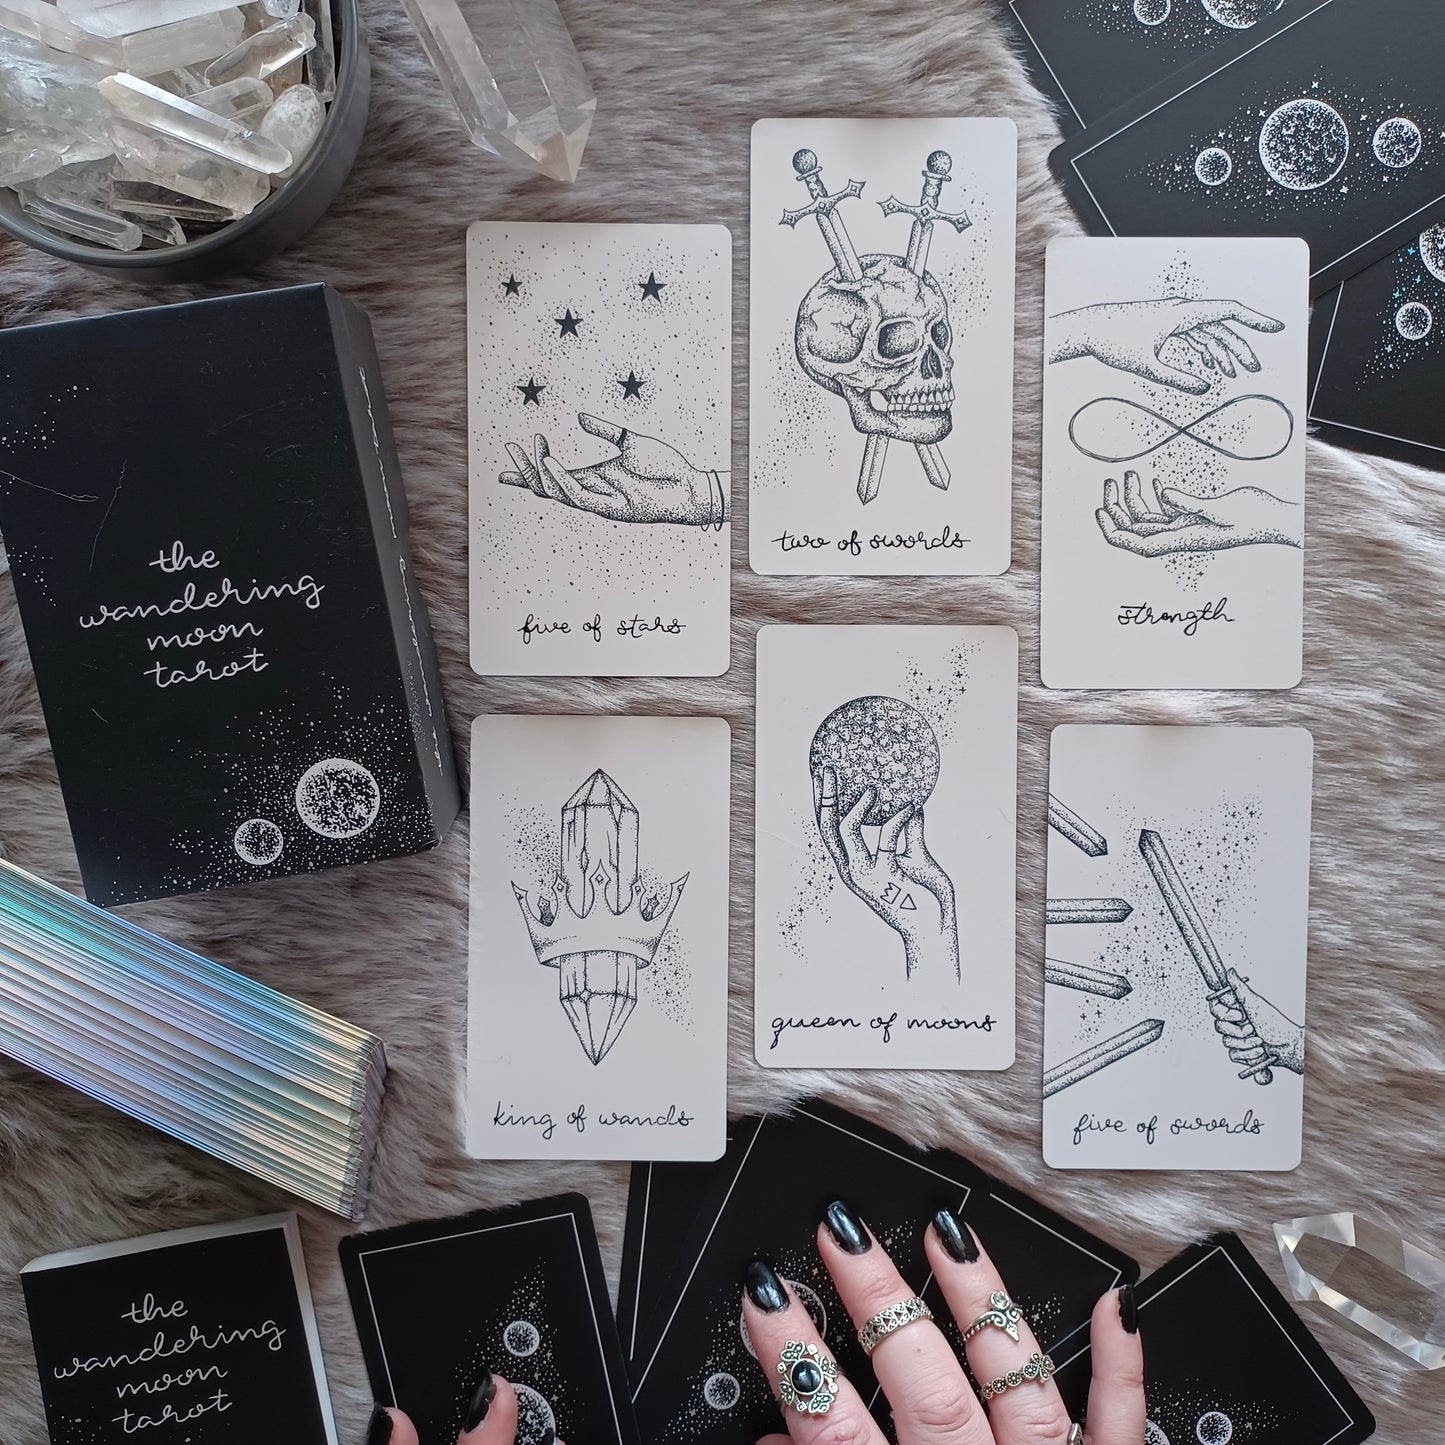 the wandering moon tarot deck authentic | indie tarot card deck | hand illustrated with guidebook